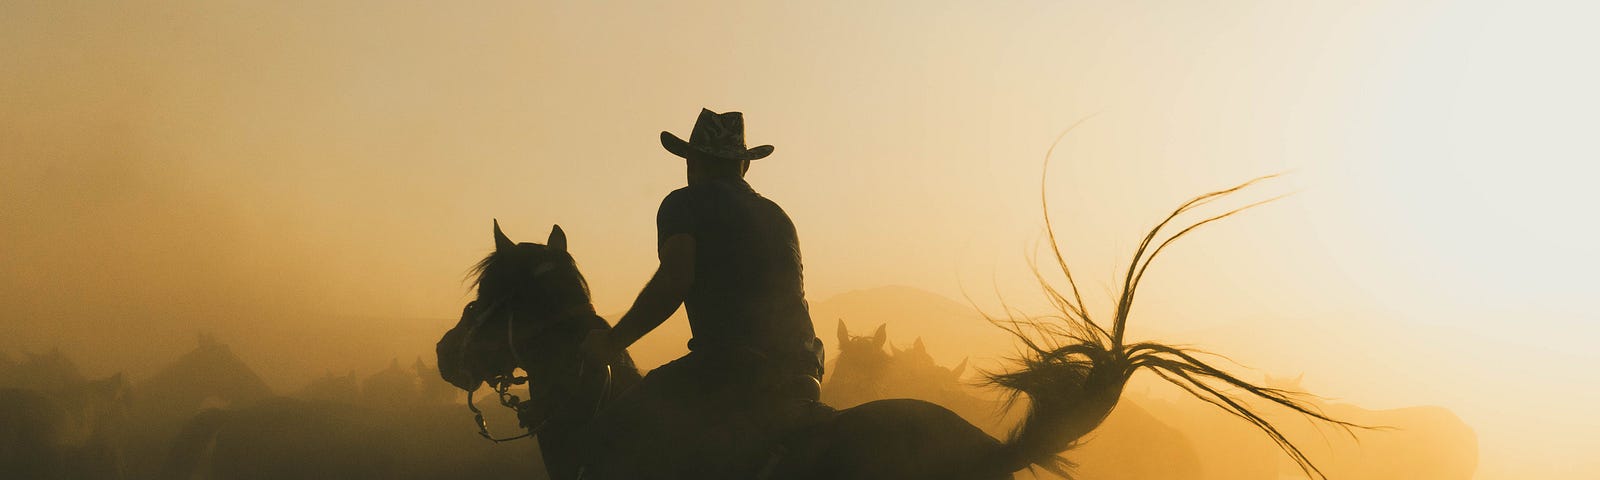 Silhouetted cowboy on a horse.